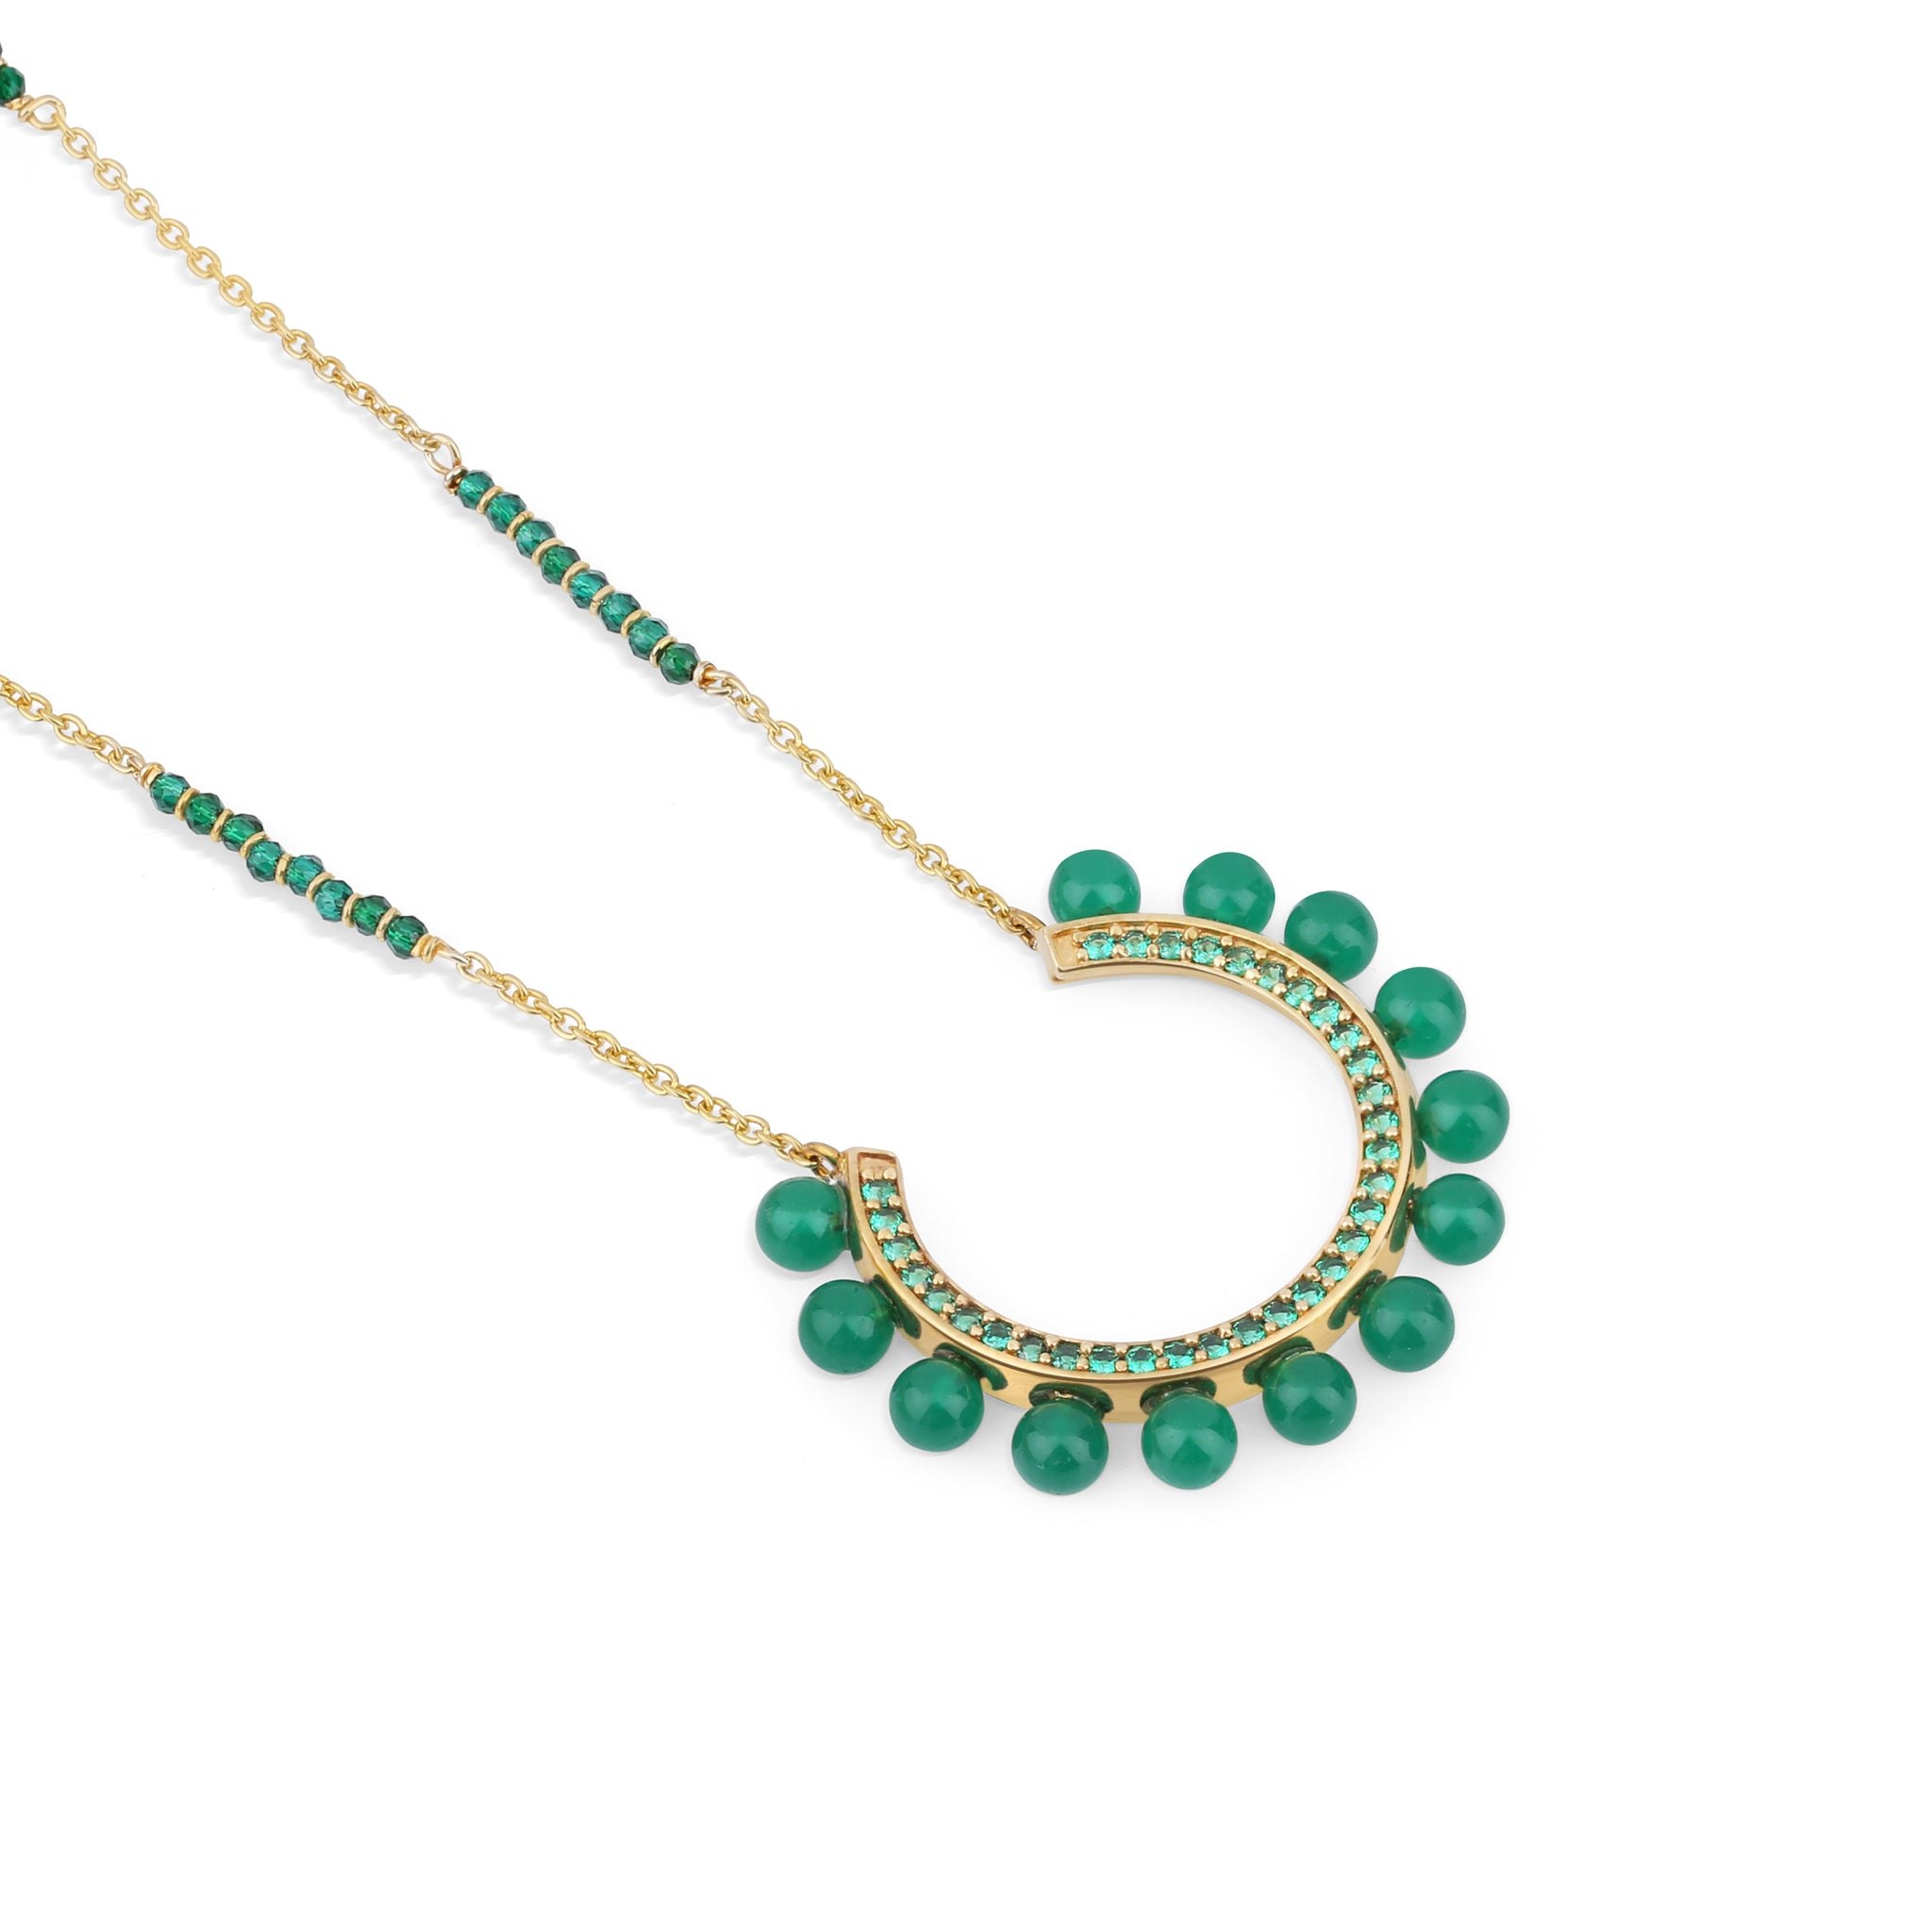 Too Ninety Degree Necklace - Emerald